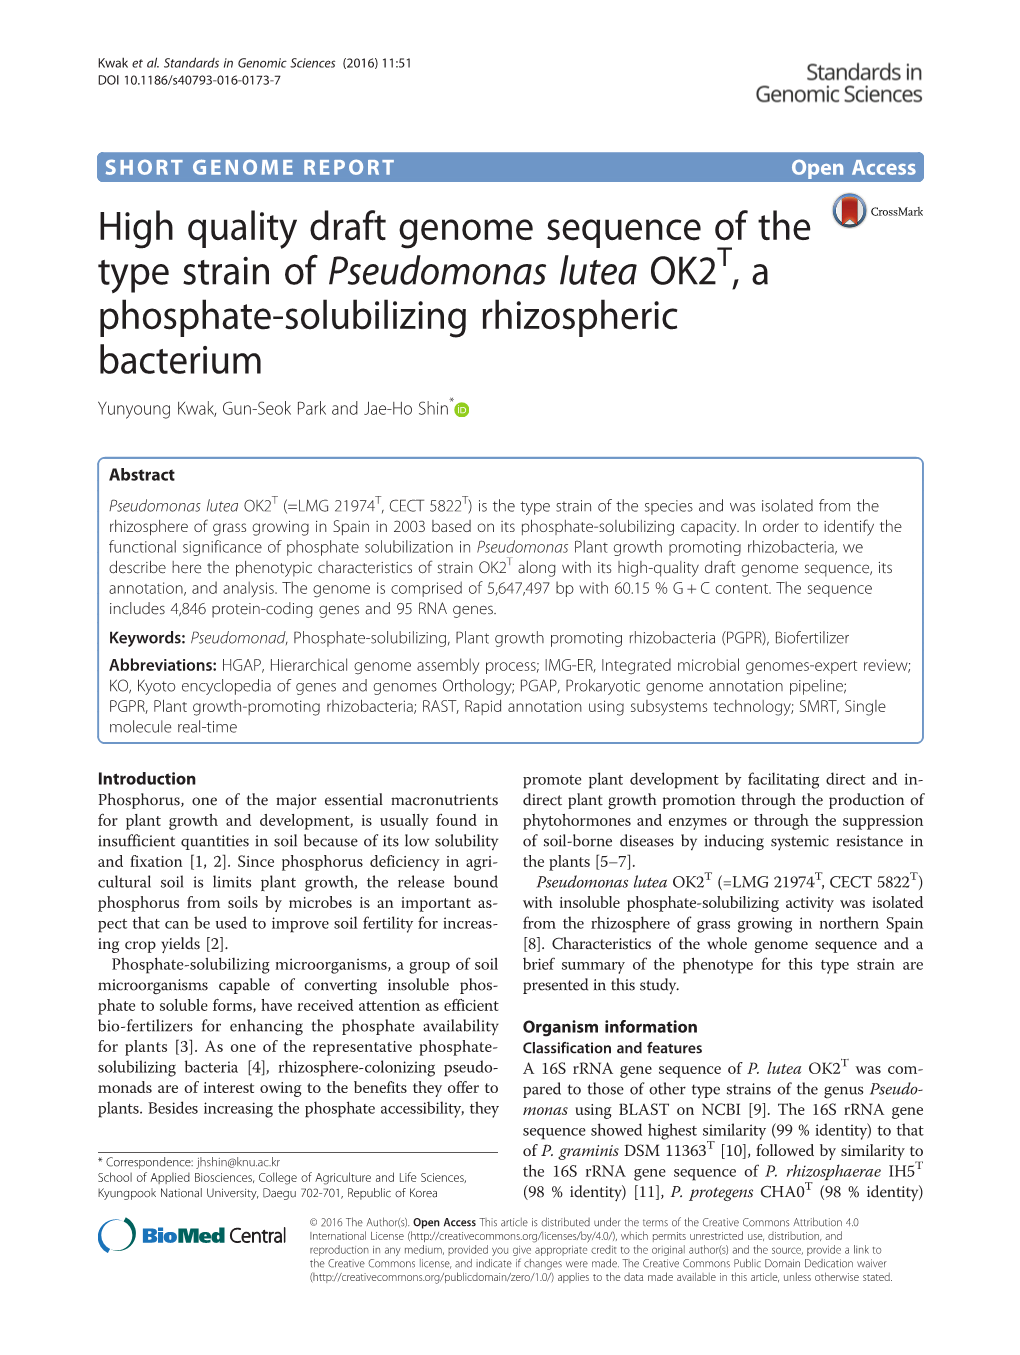 High Quality Draft Genome Sequence of the Type Strain of Pseudomonas